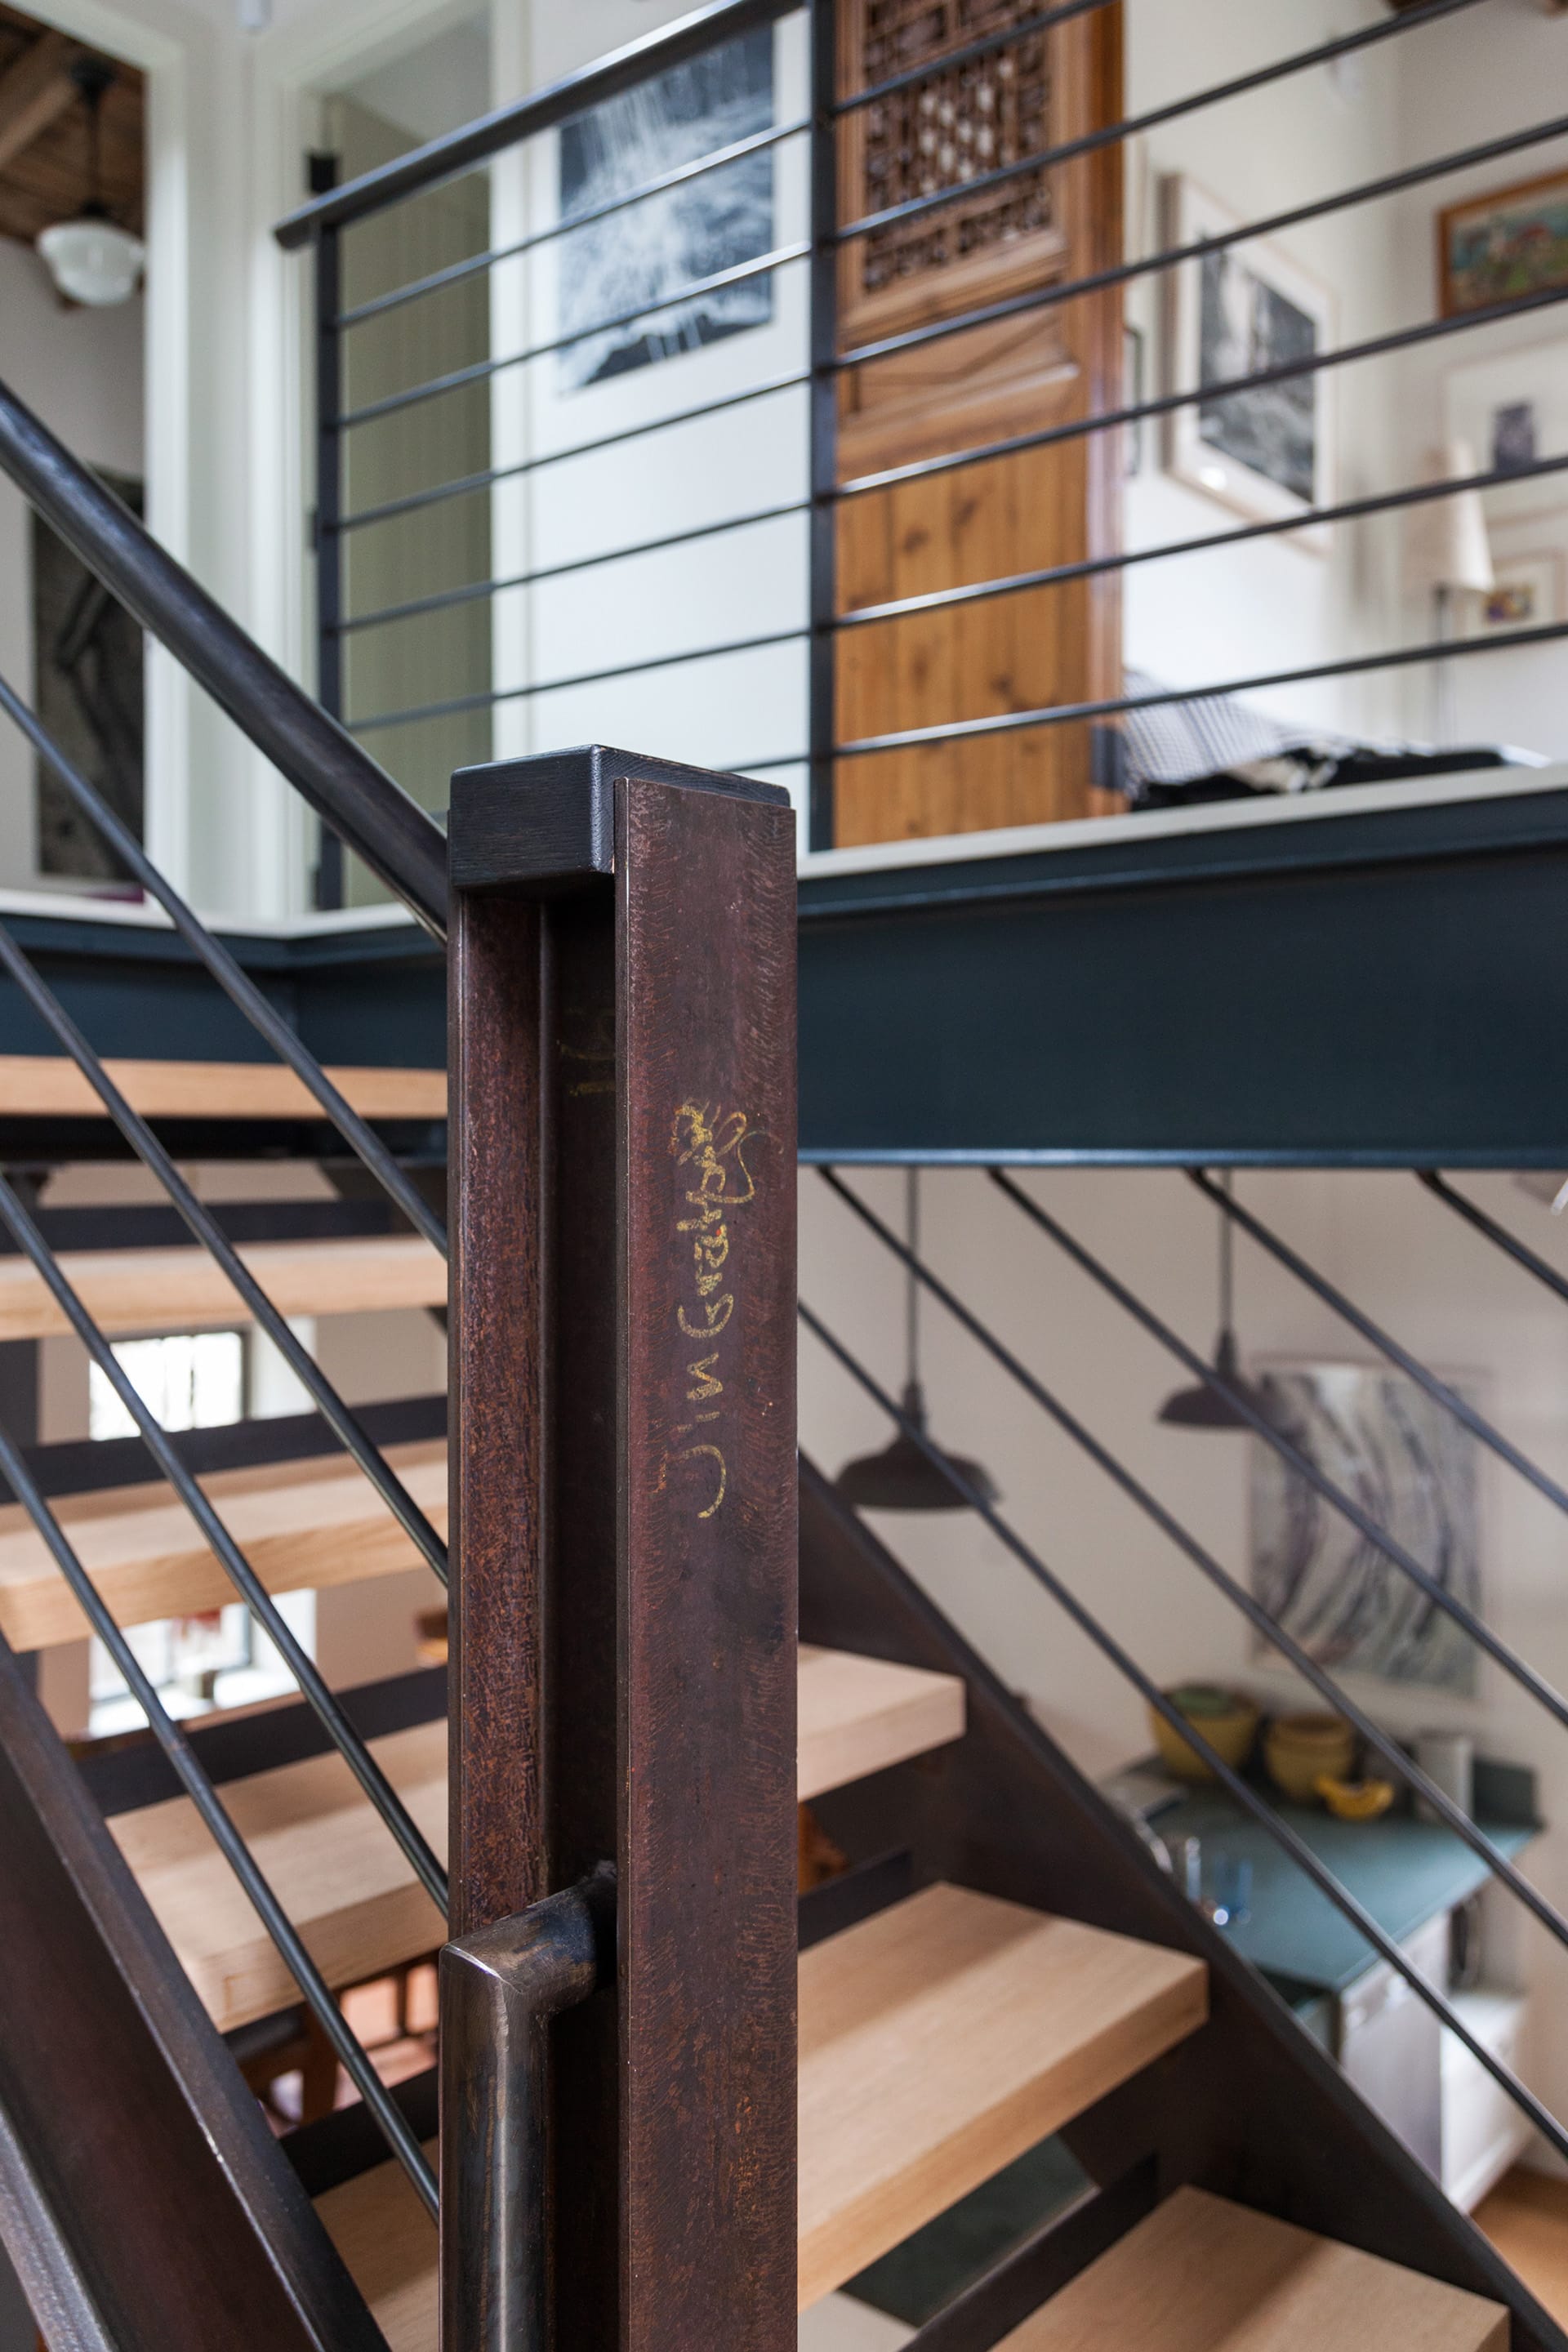 Metal newel post and railings in detail on a modern staircase.